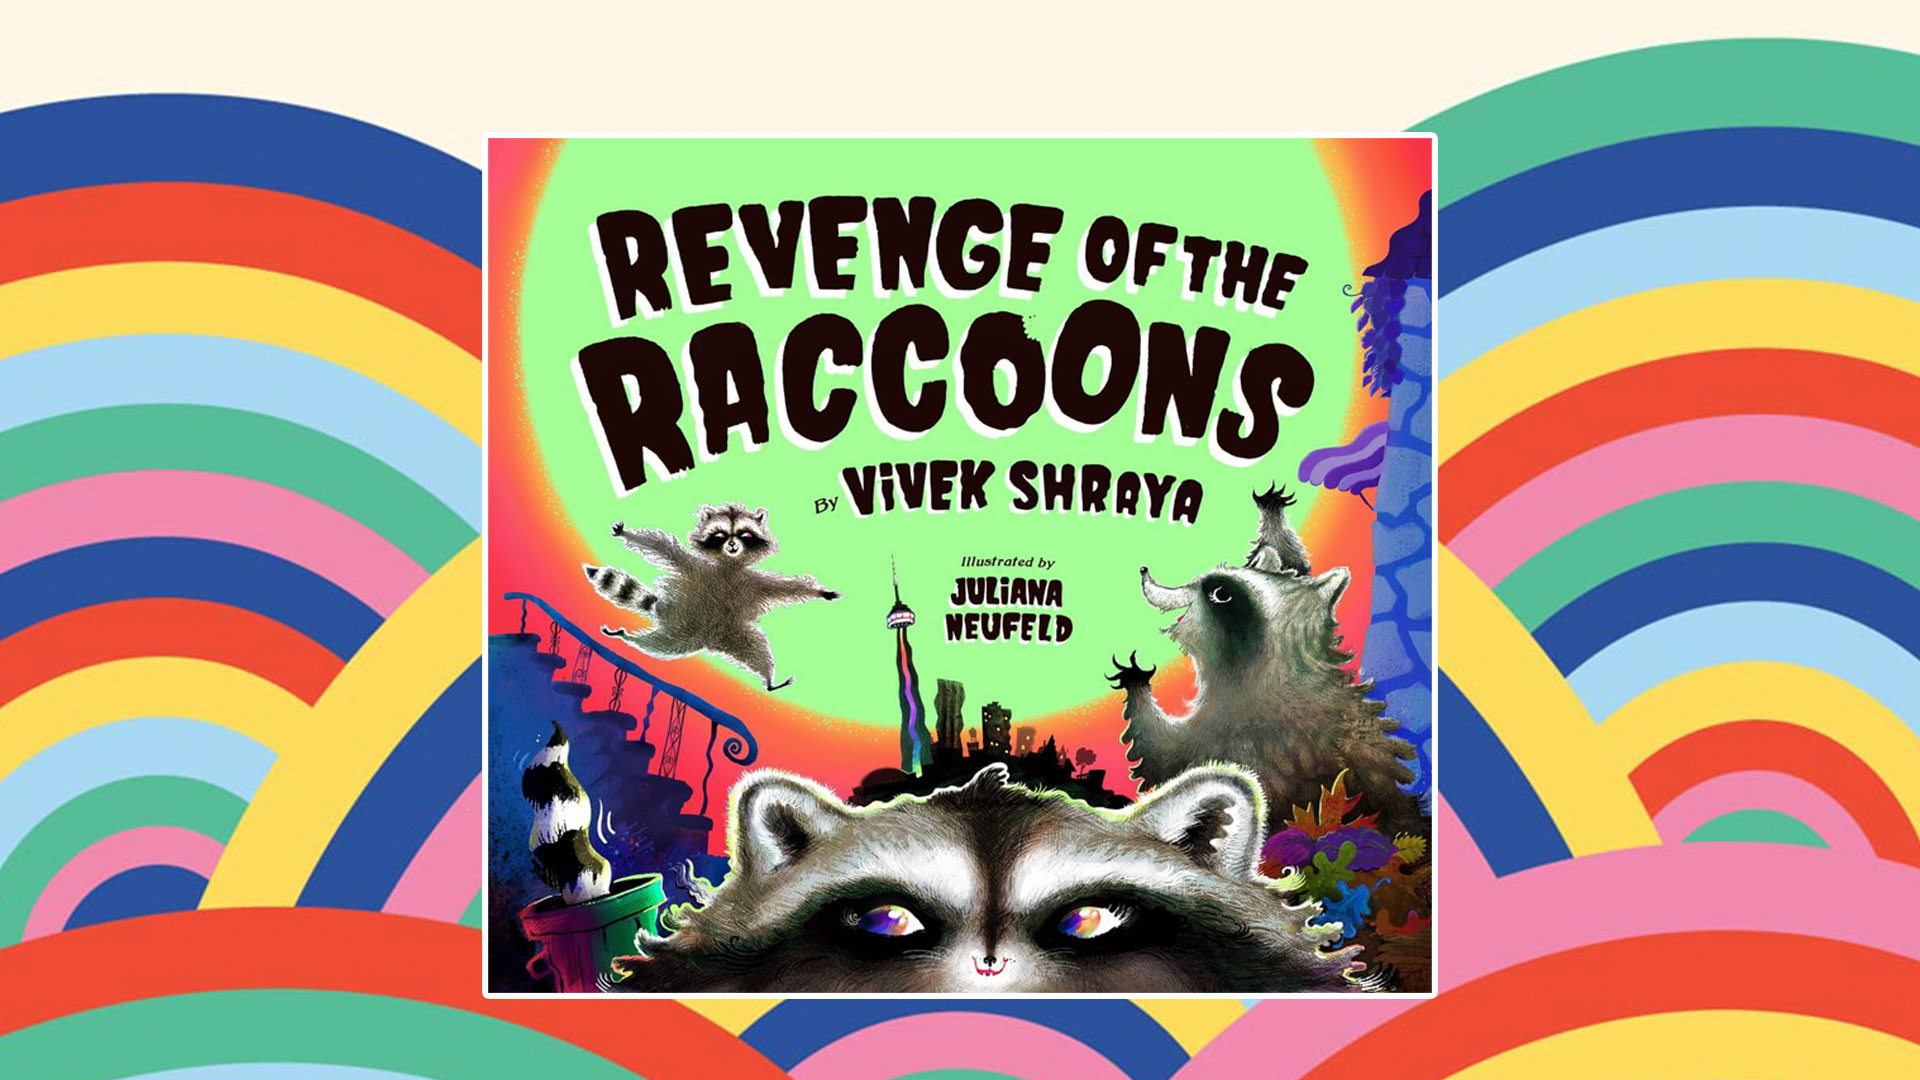 Revenge of the Raccoons book cover